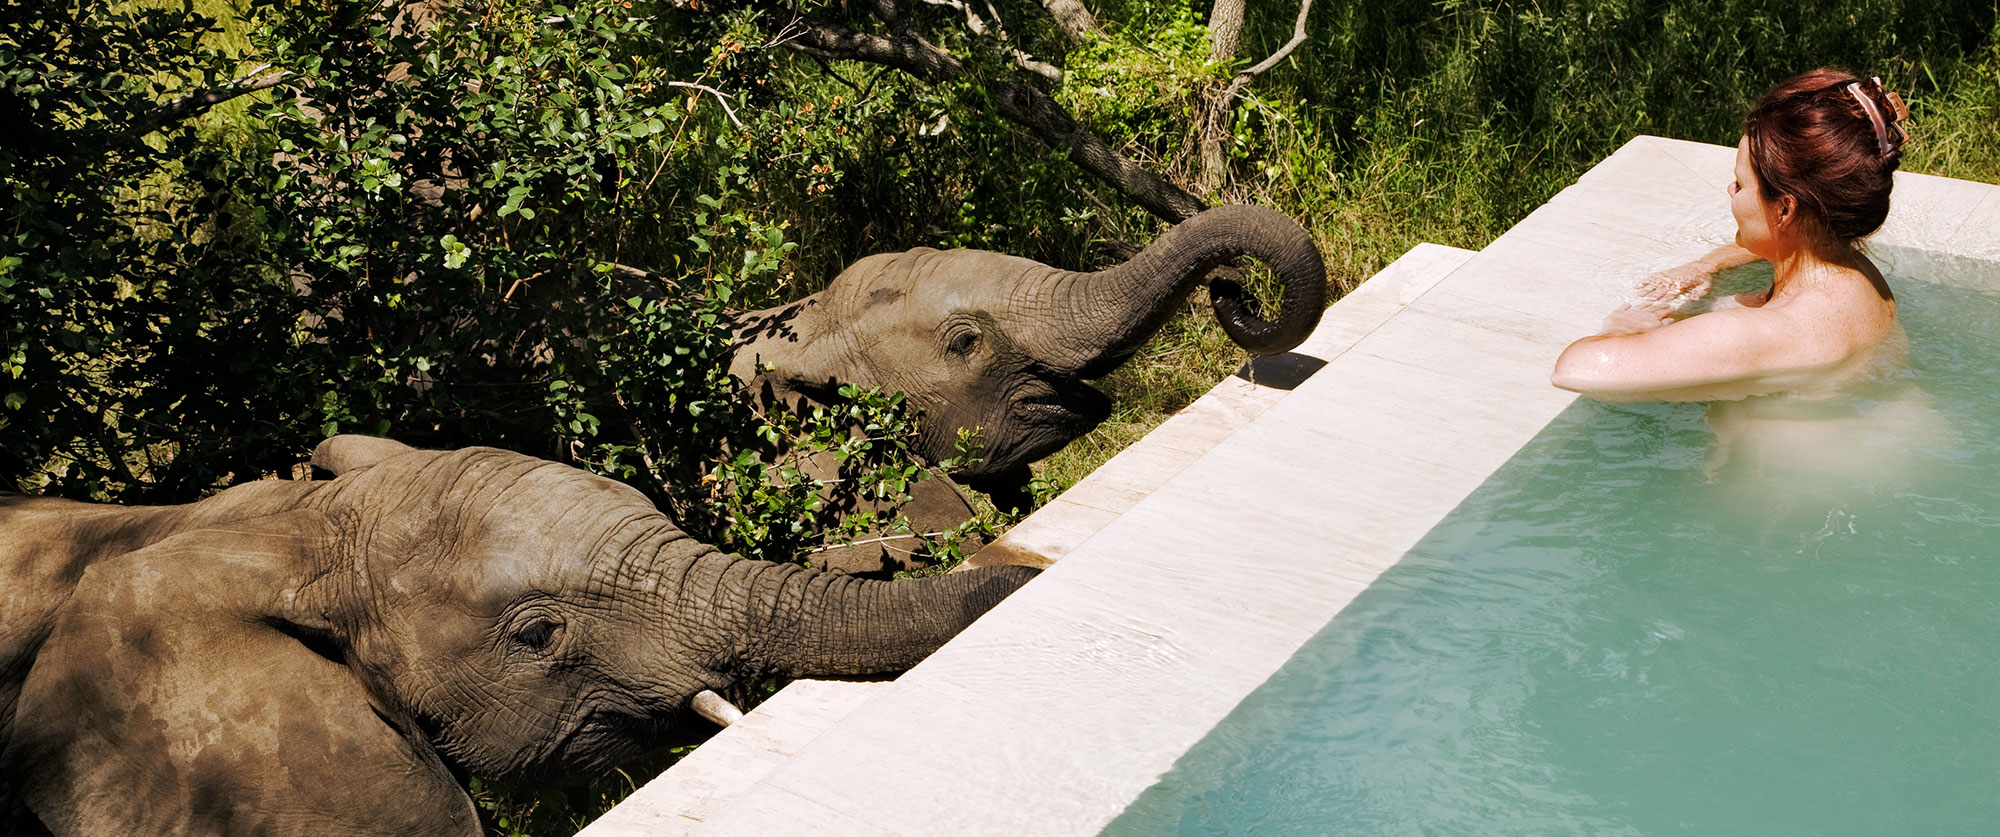 South Africa luxury travel packages - Elephant drinking from the pool at Royal Malewane safari lodge